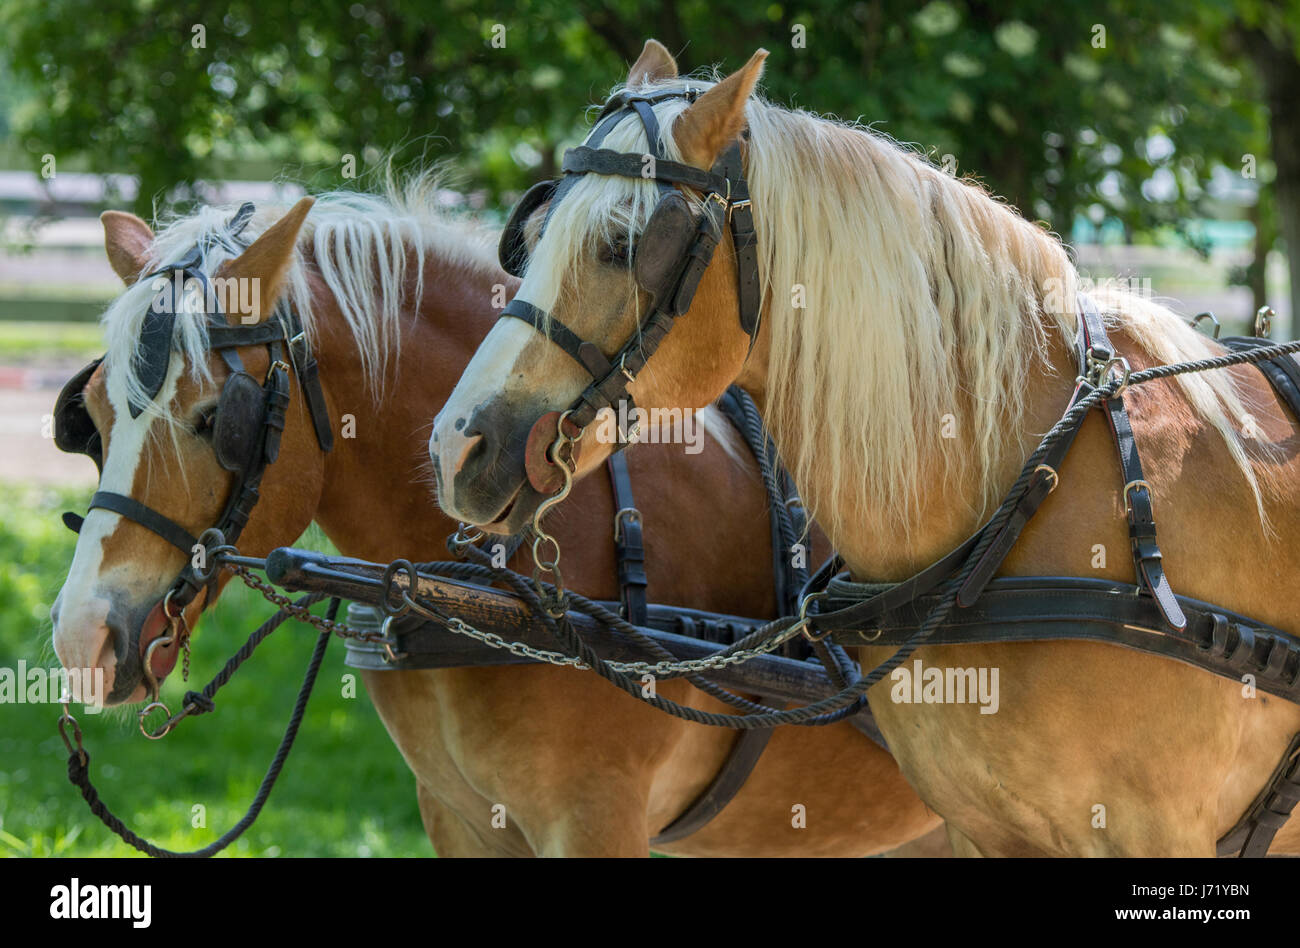 Two Haflinger horses ready for the carriage Stock Photo